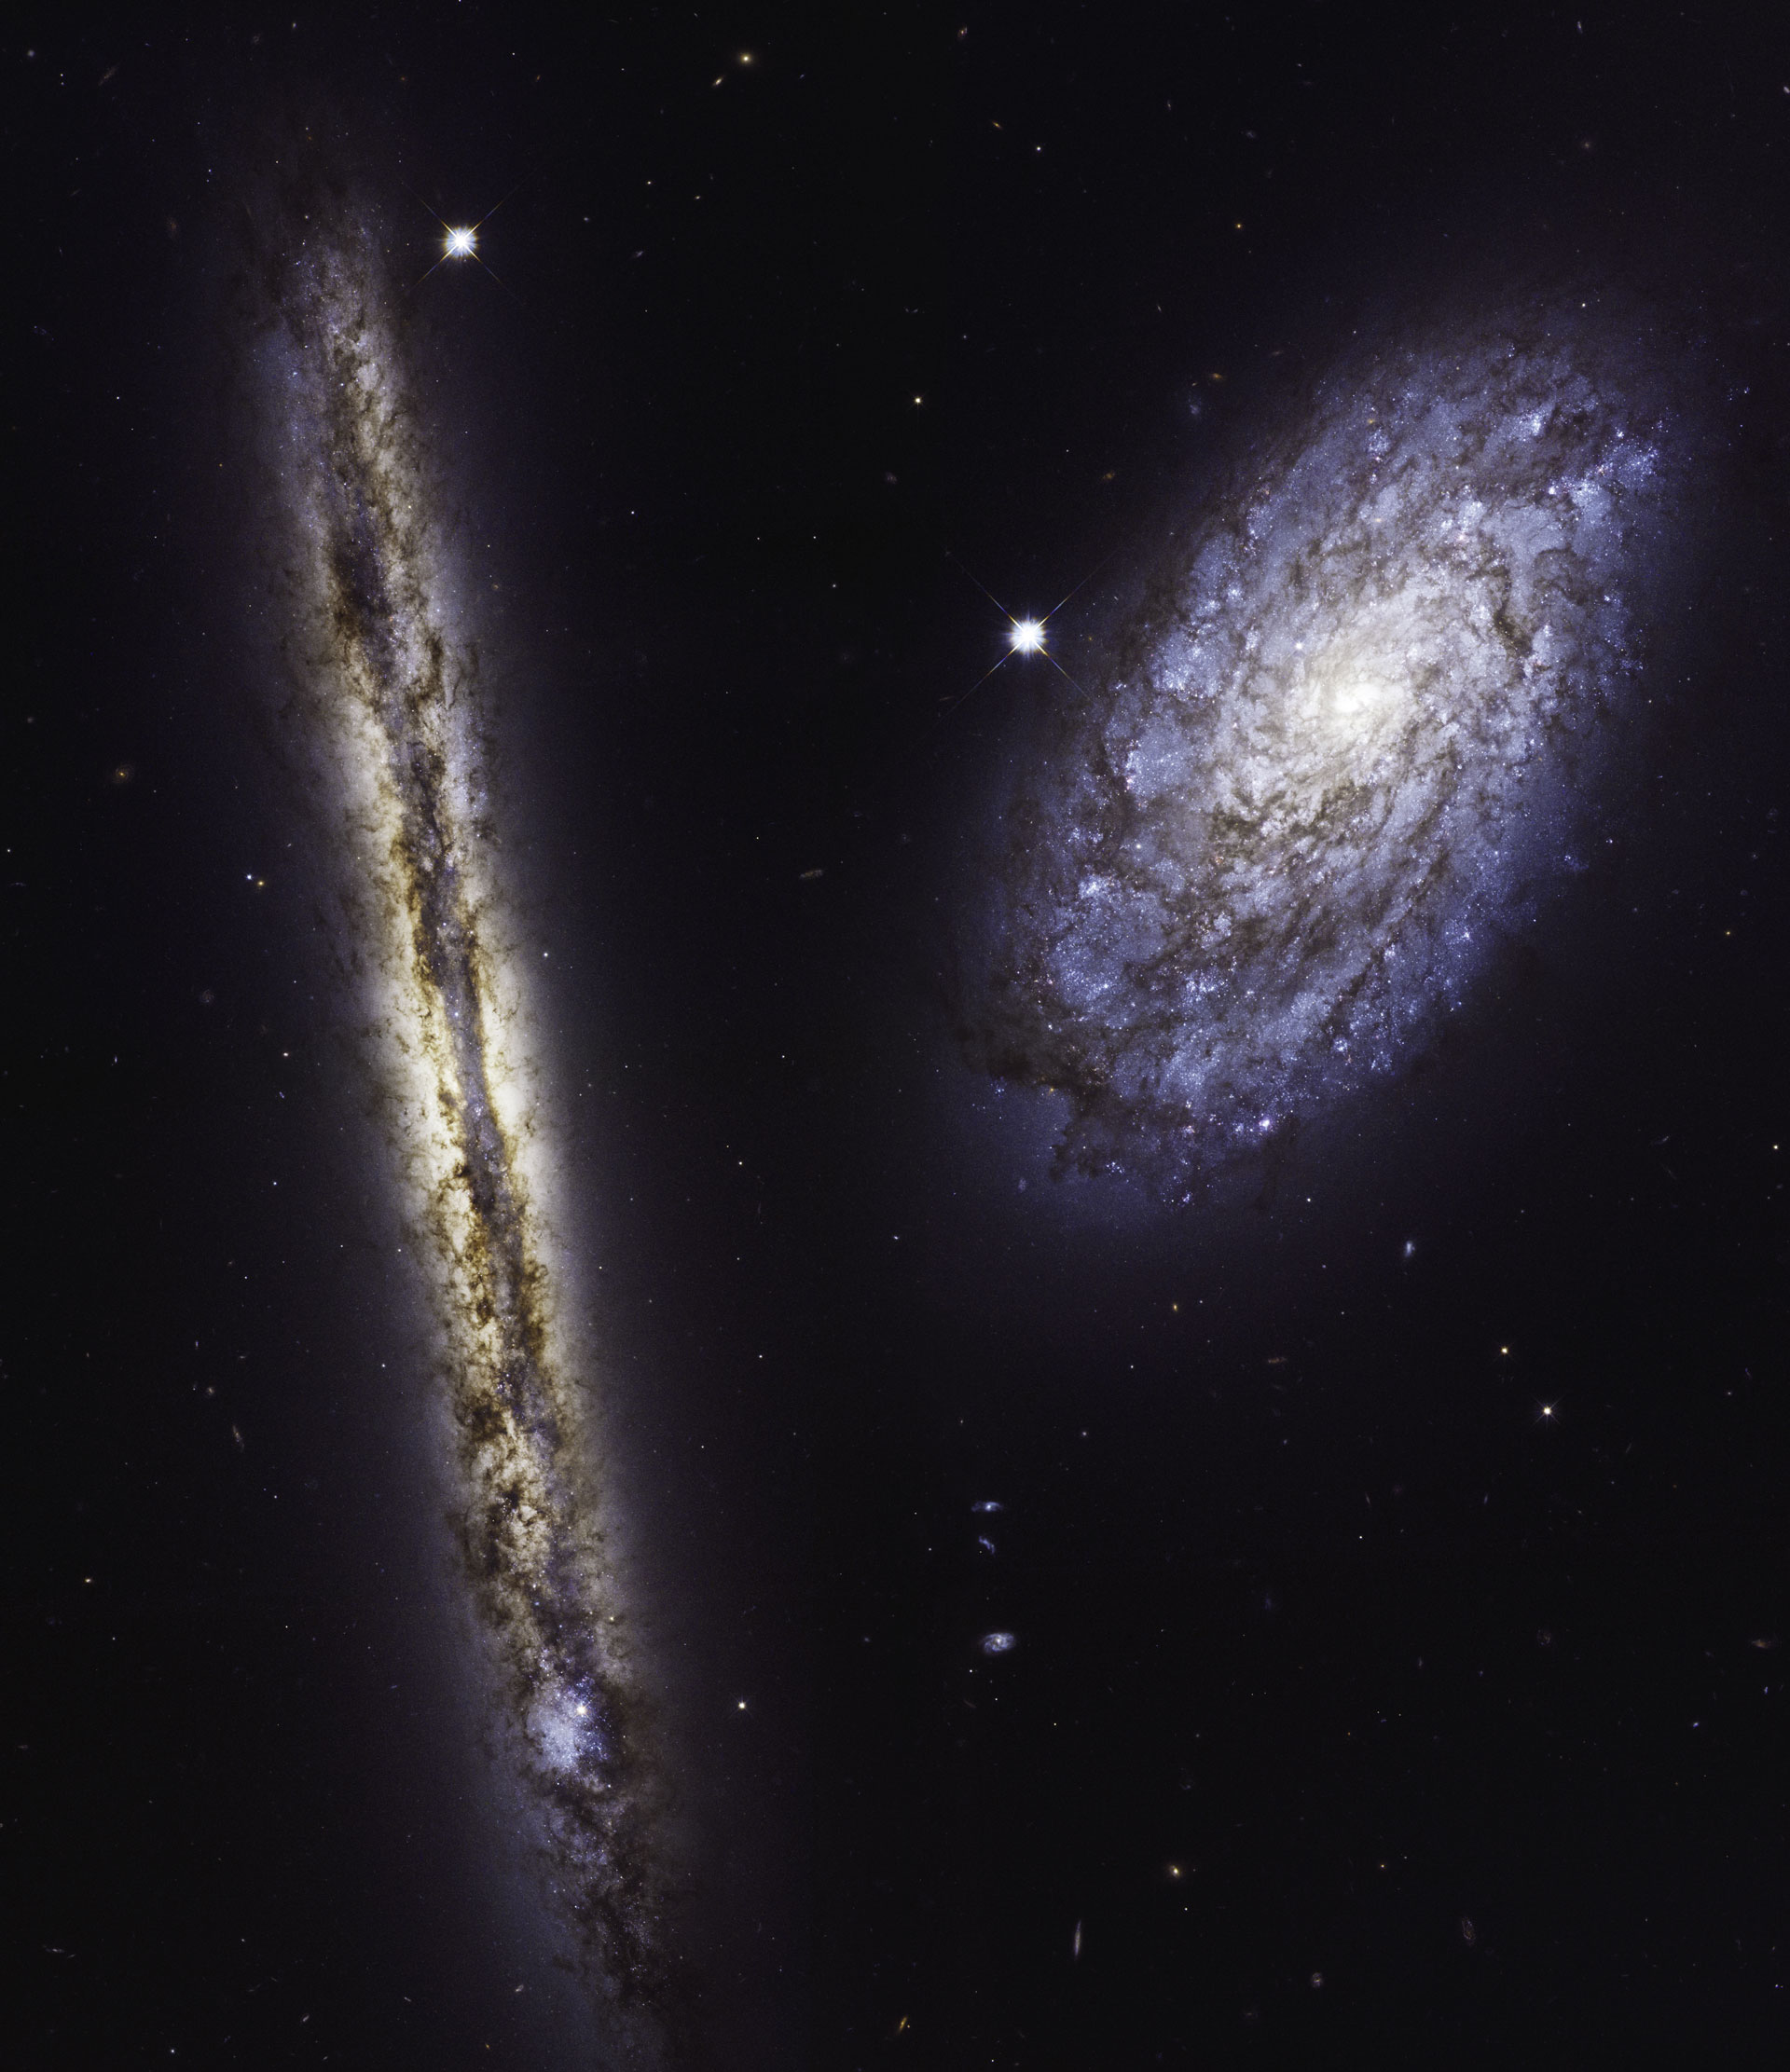 Hubble's Celebrates 27th Anniversary with Image of Spiral Galaxies ...